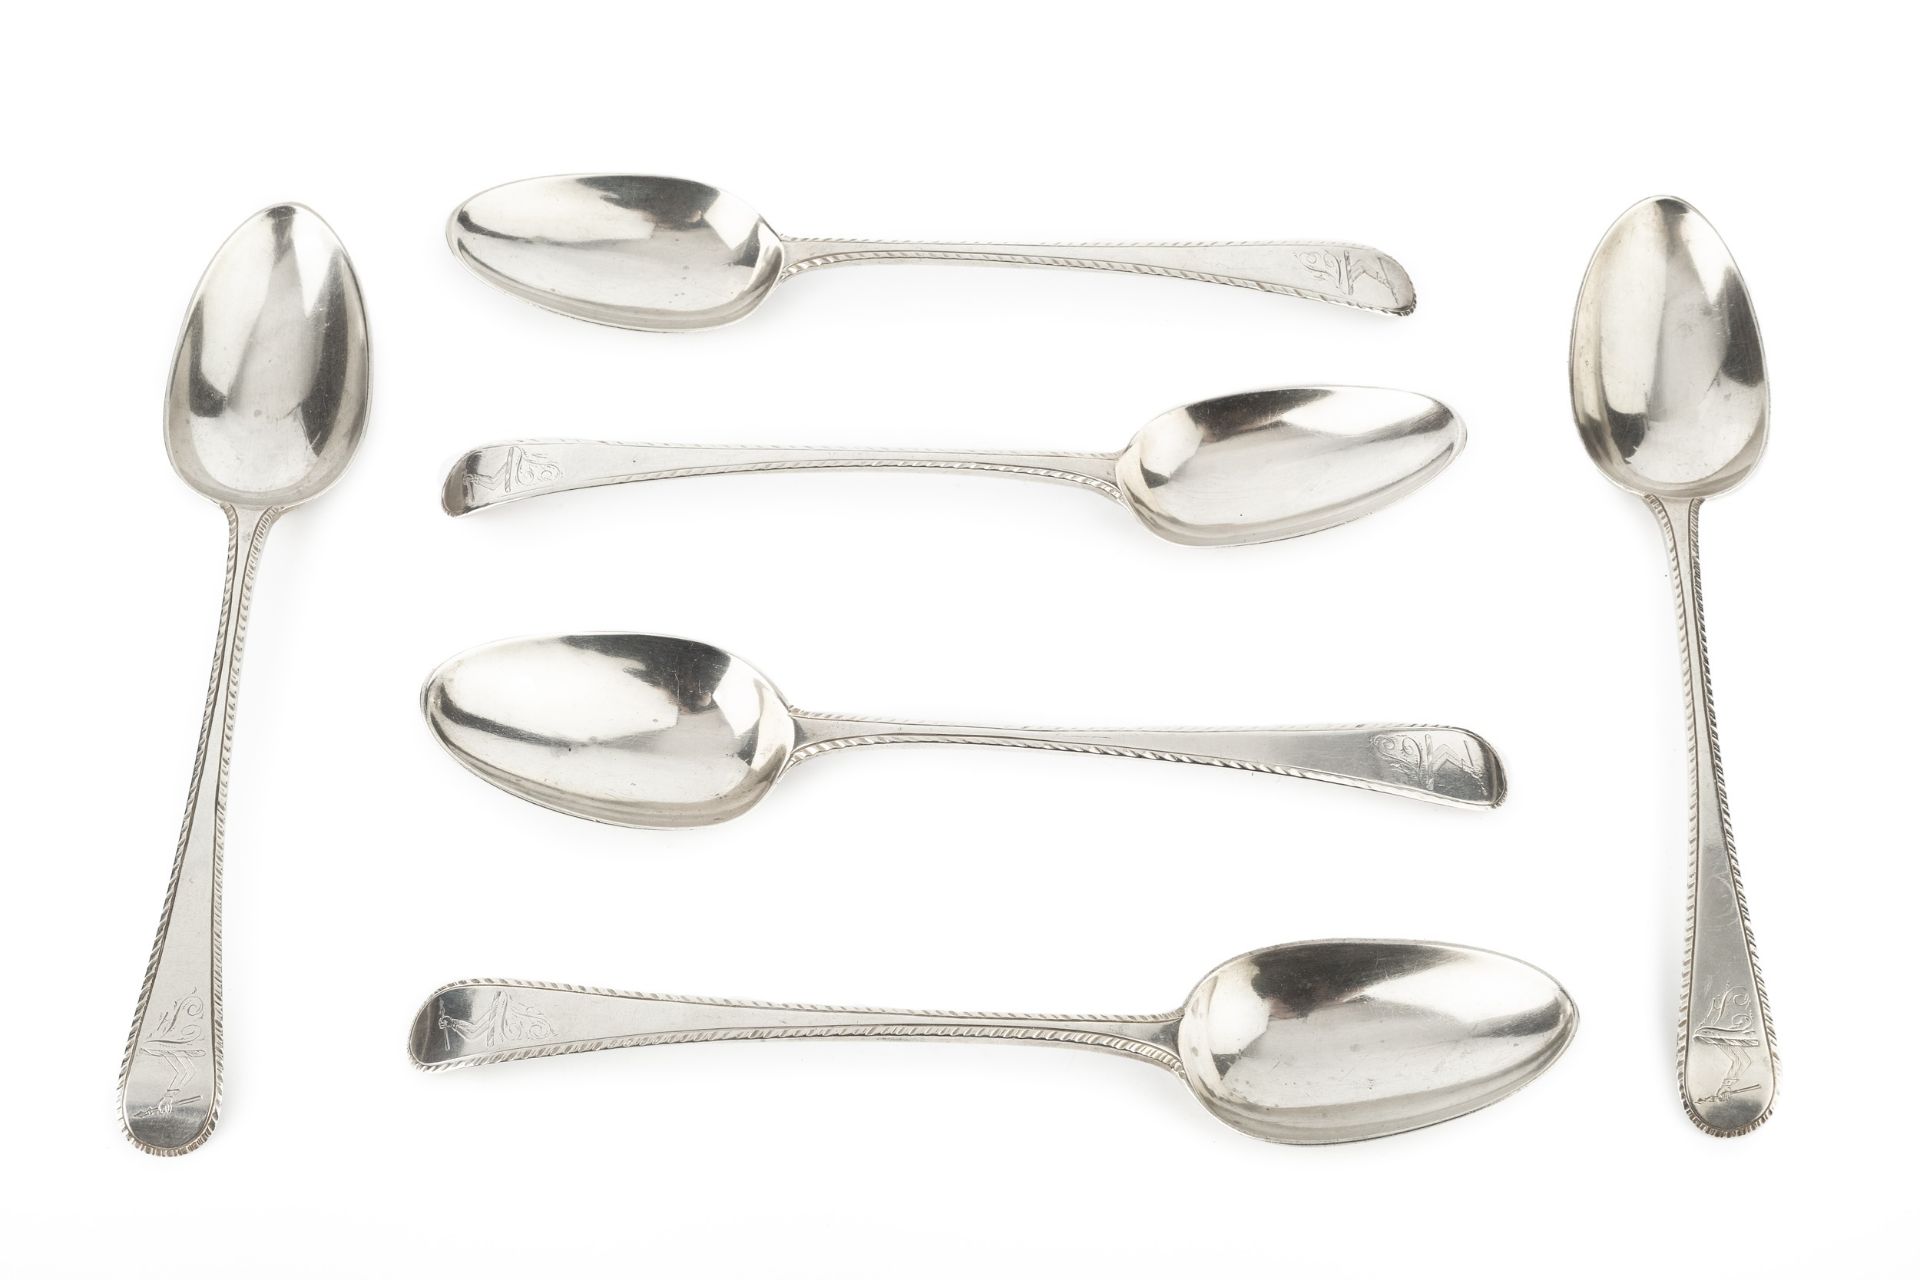 A matched set of six George III feather edged old English pattern table spoons, three with marks